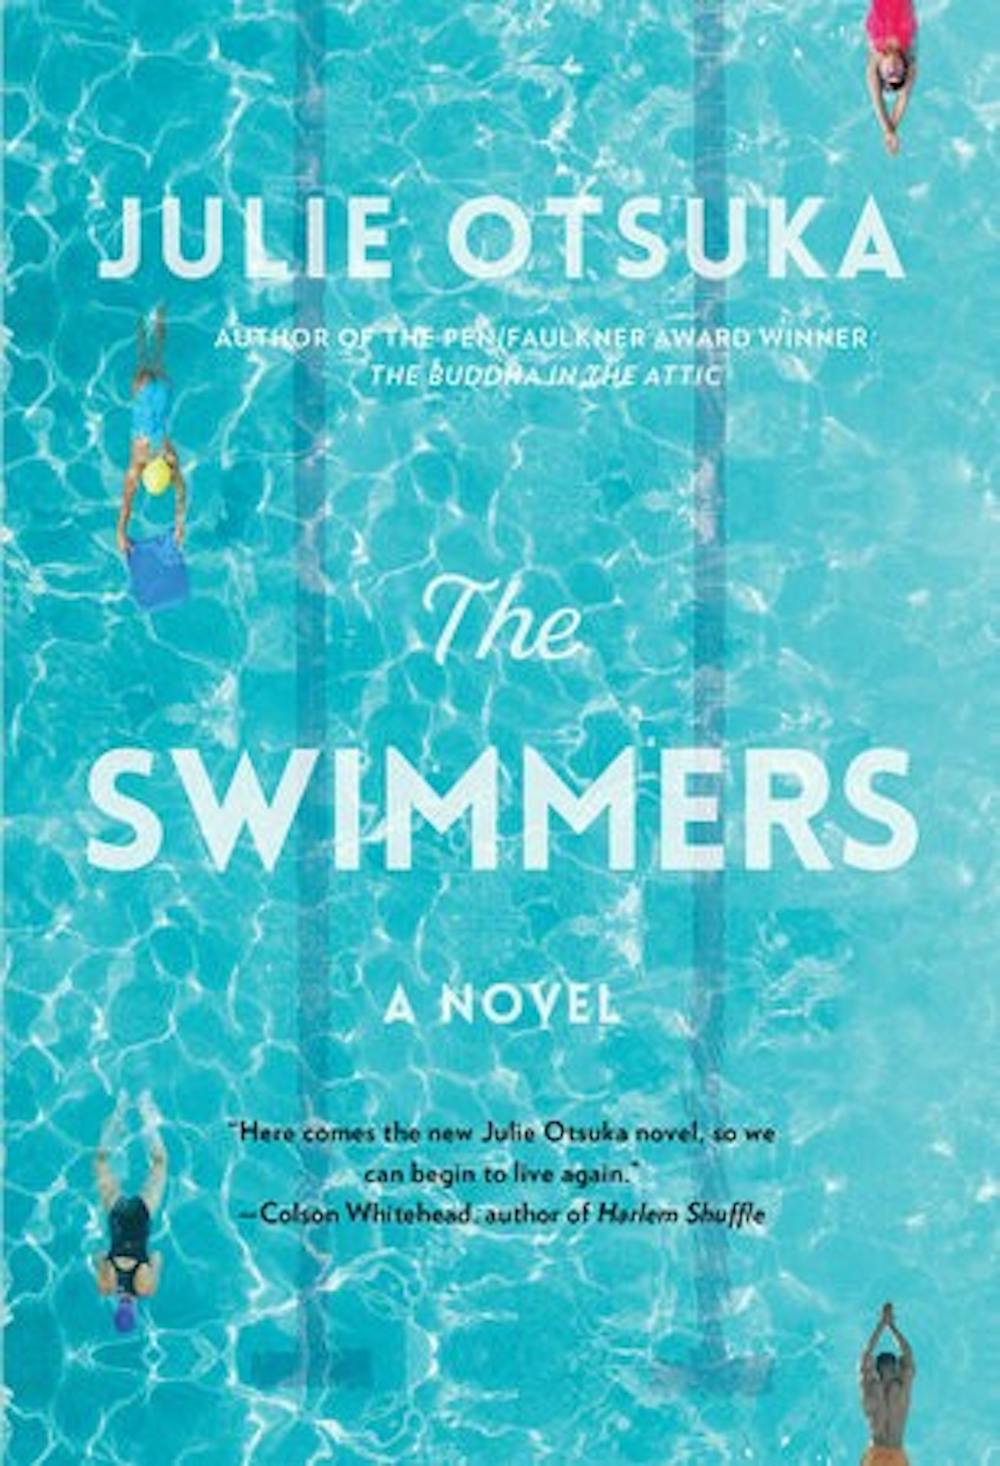 Review: "The Swimmers" by Julie Otsuka